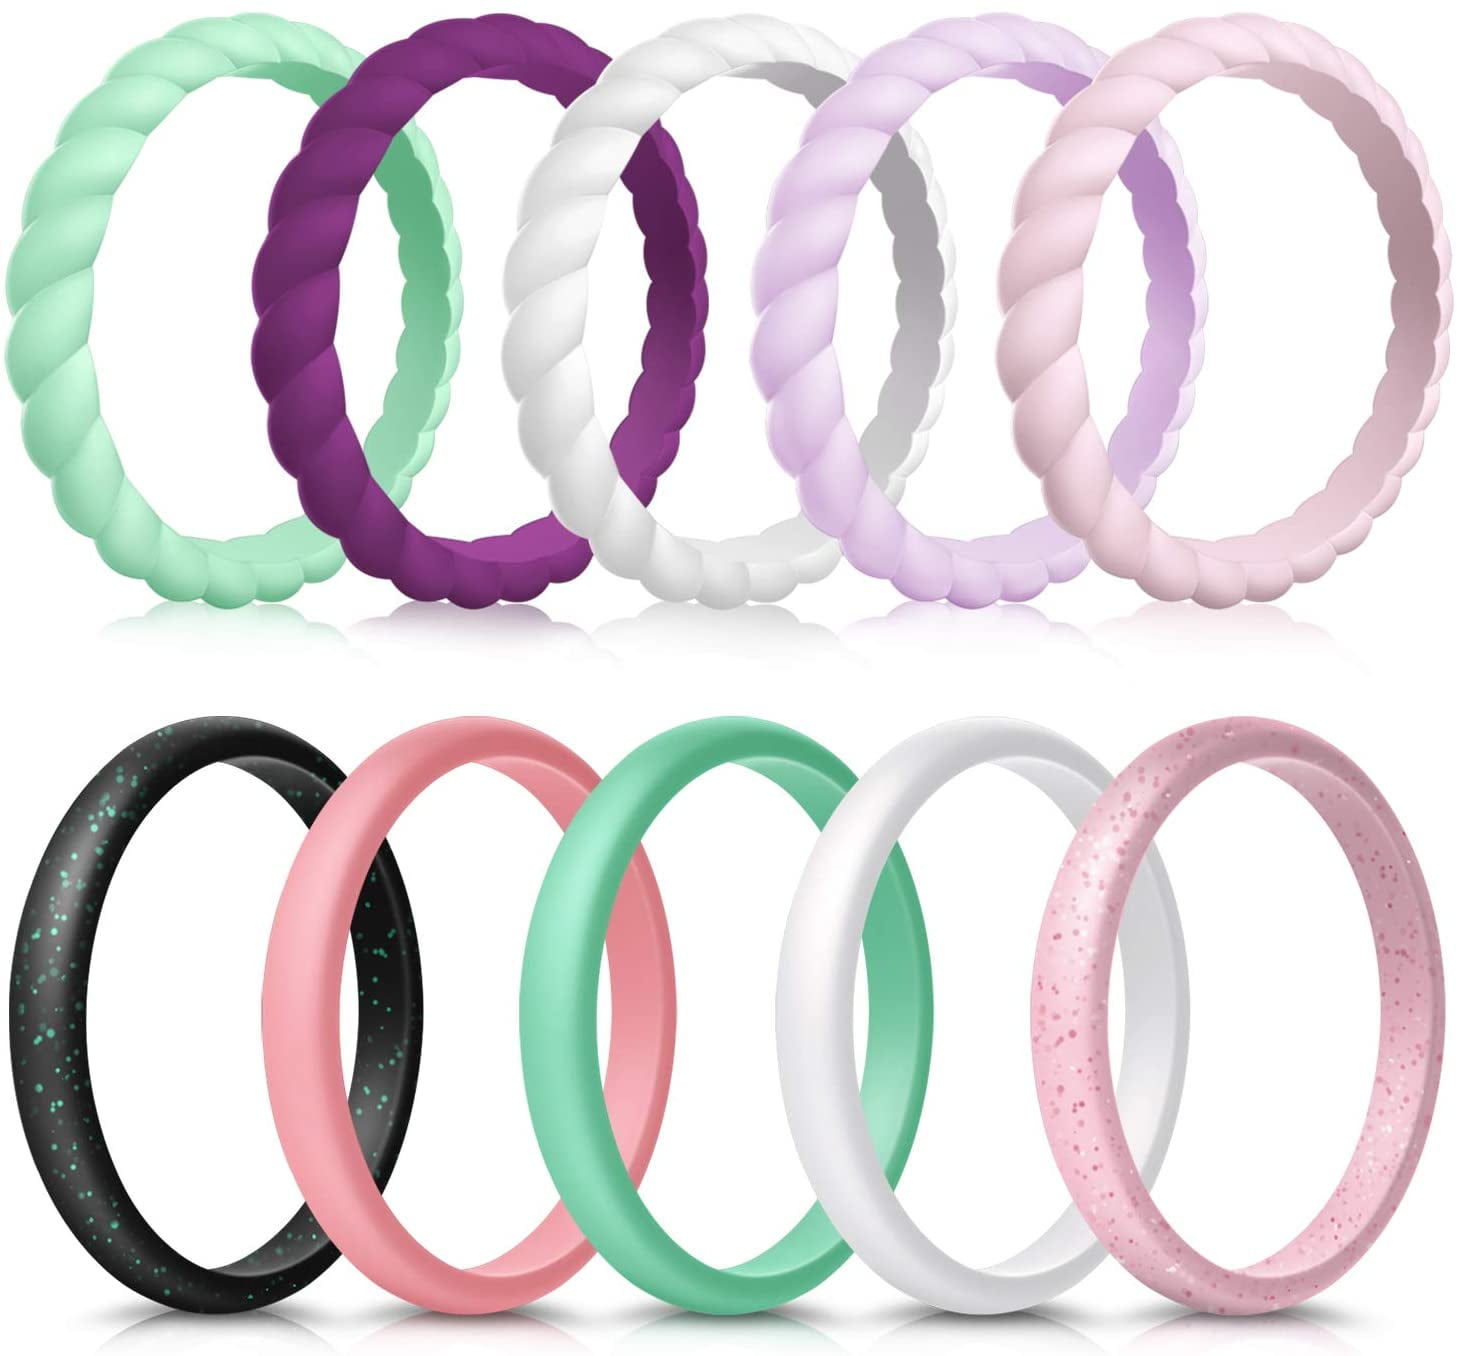 Durable Wedding Ring Replacement Comfortable fit Skin Safe Forthee Breathable Designed Silicone Wedding Ring for Women 5.7mm Silicone Rubber Band